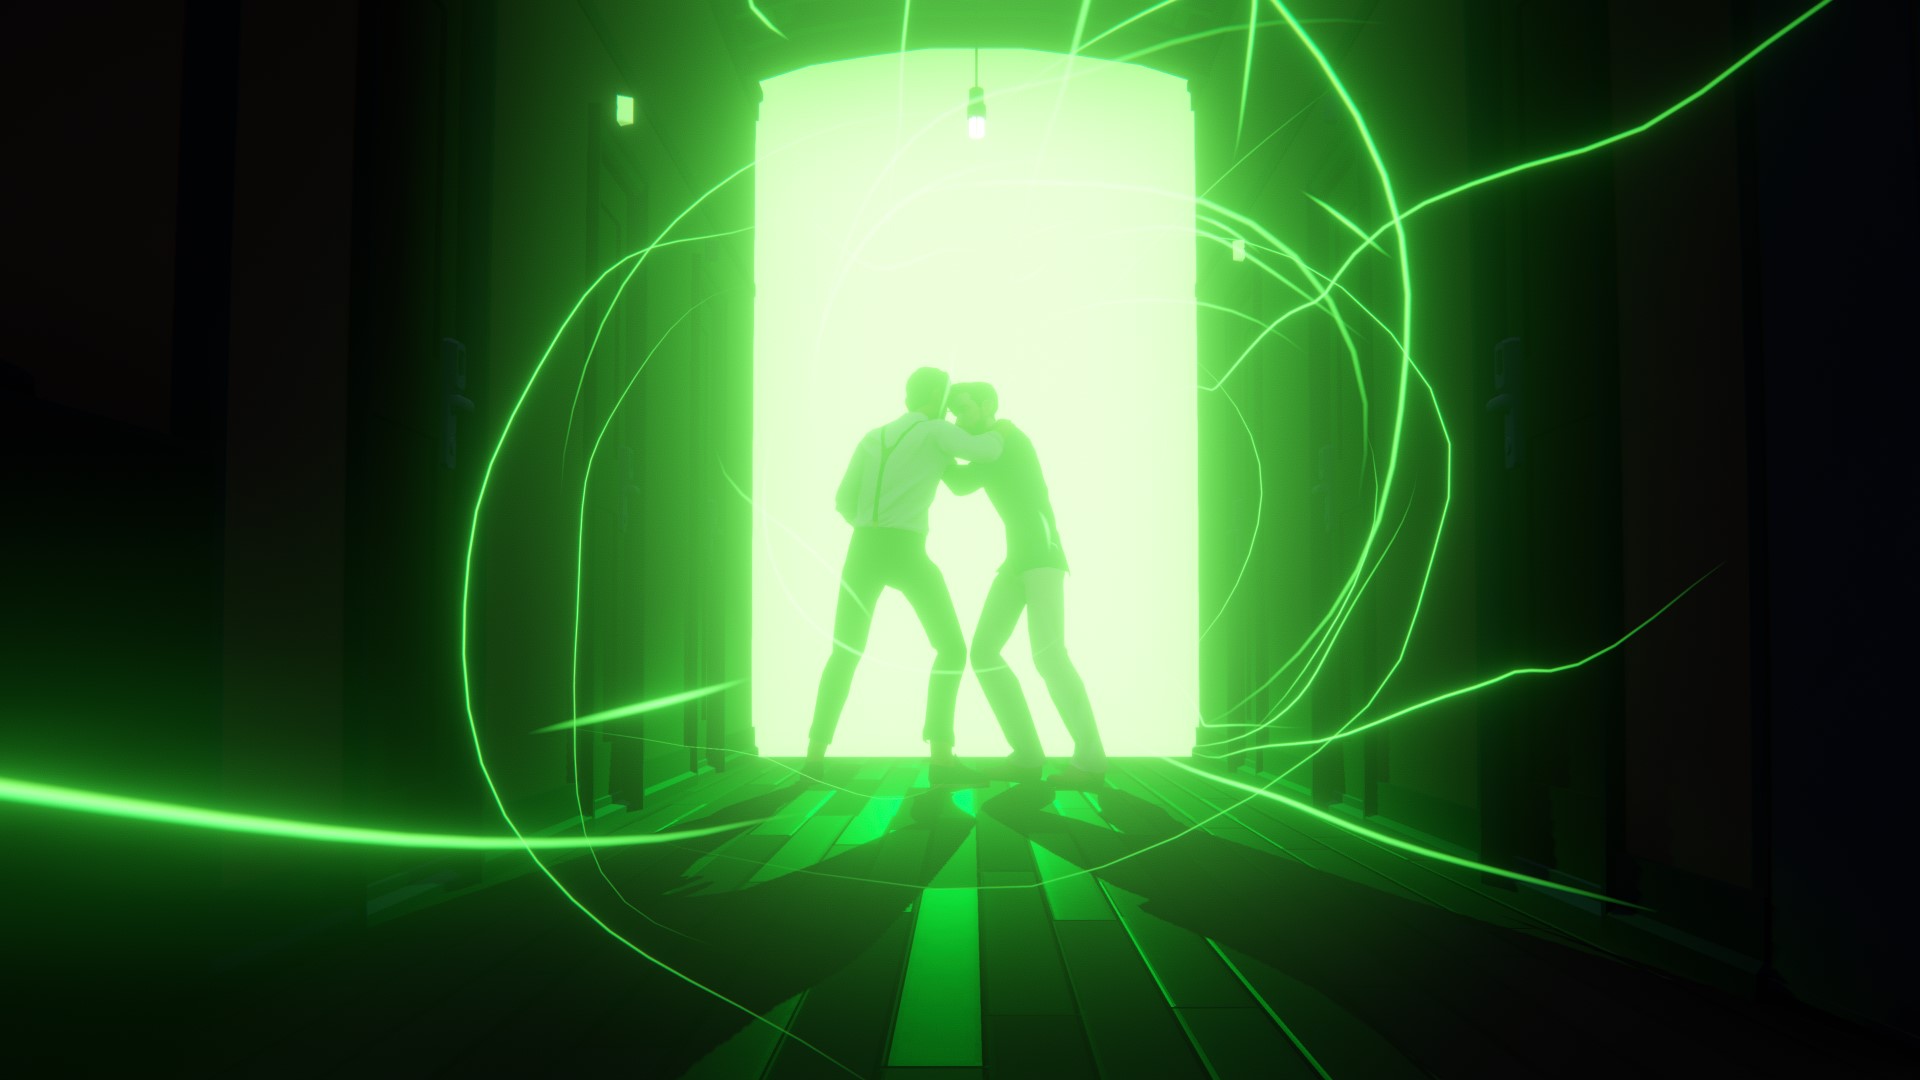 A glowing green doorway with two characters in silouhette